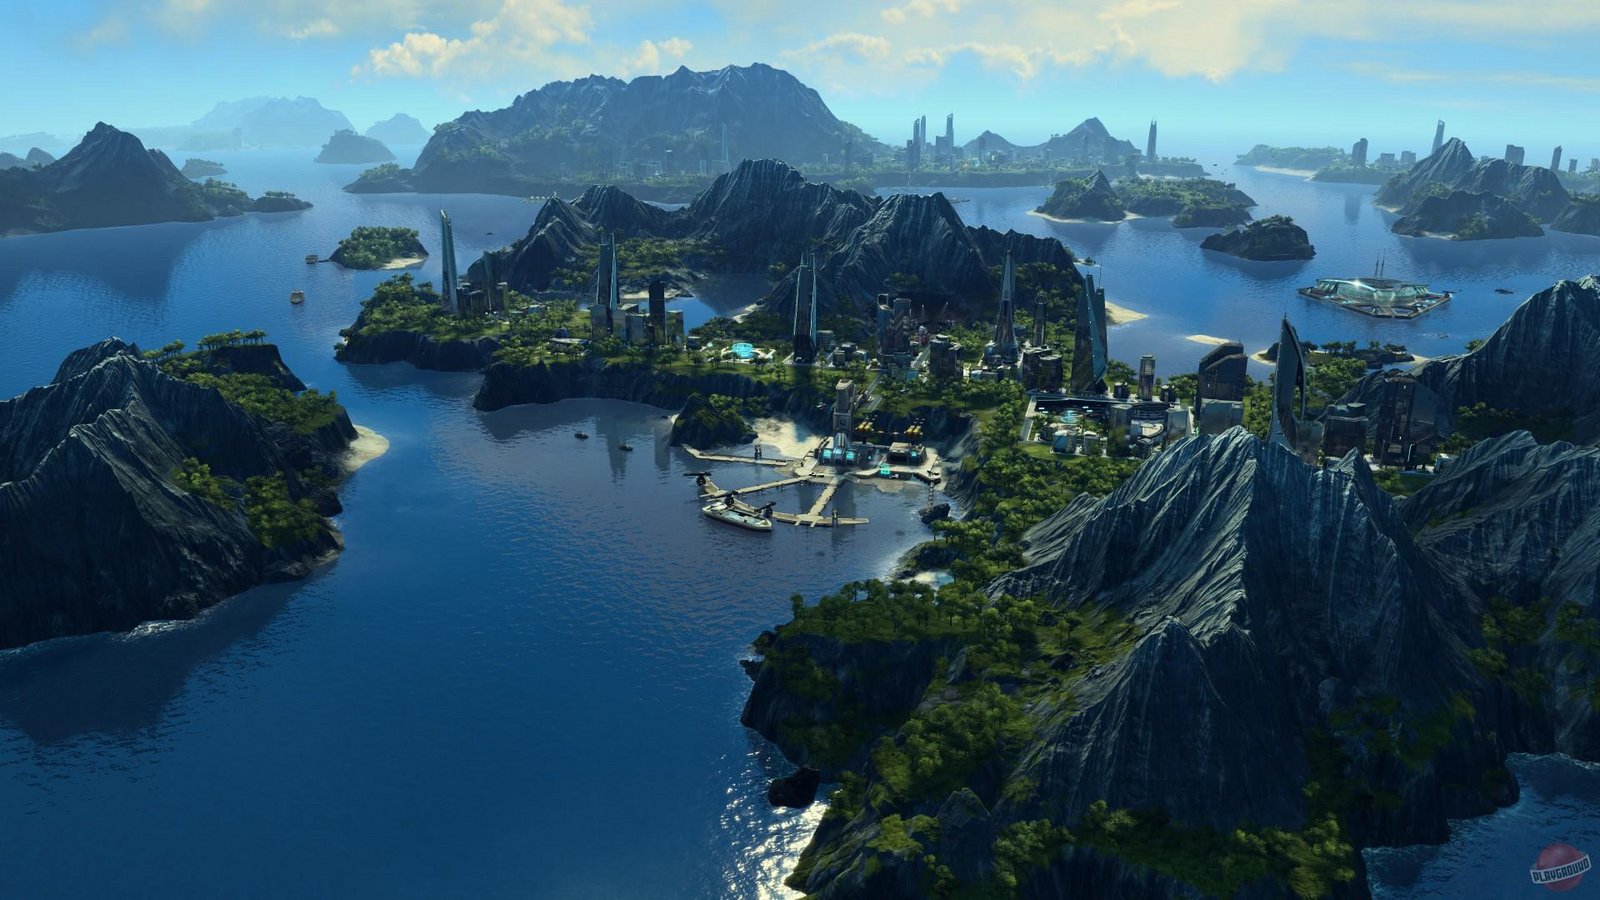 Anno 2205: Wildwater Bay